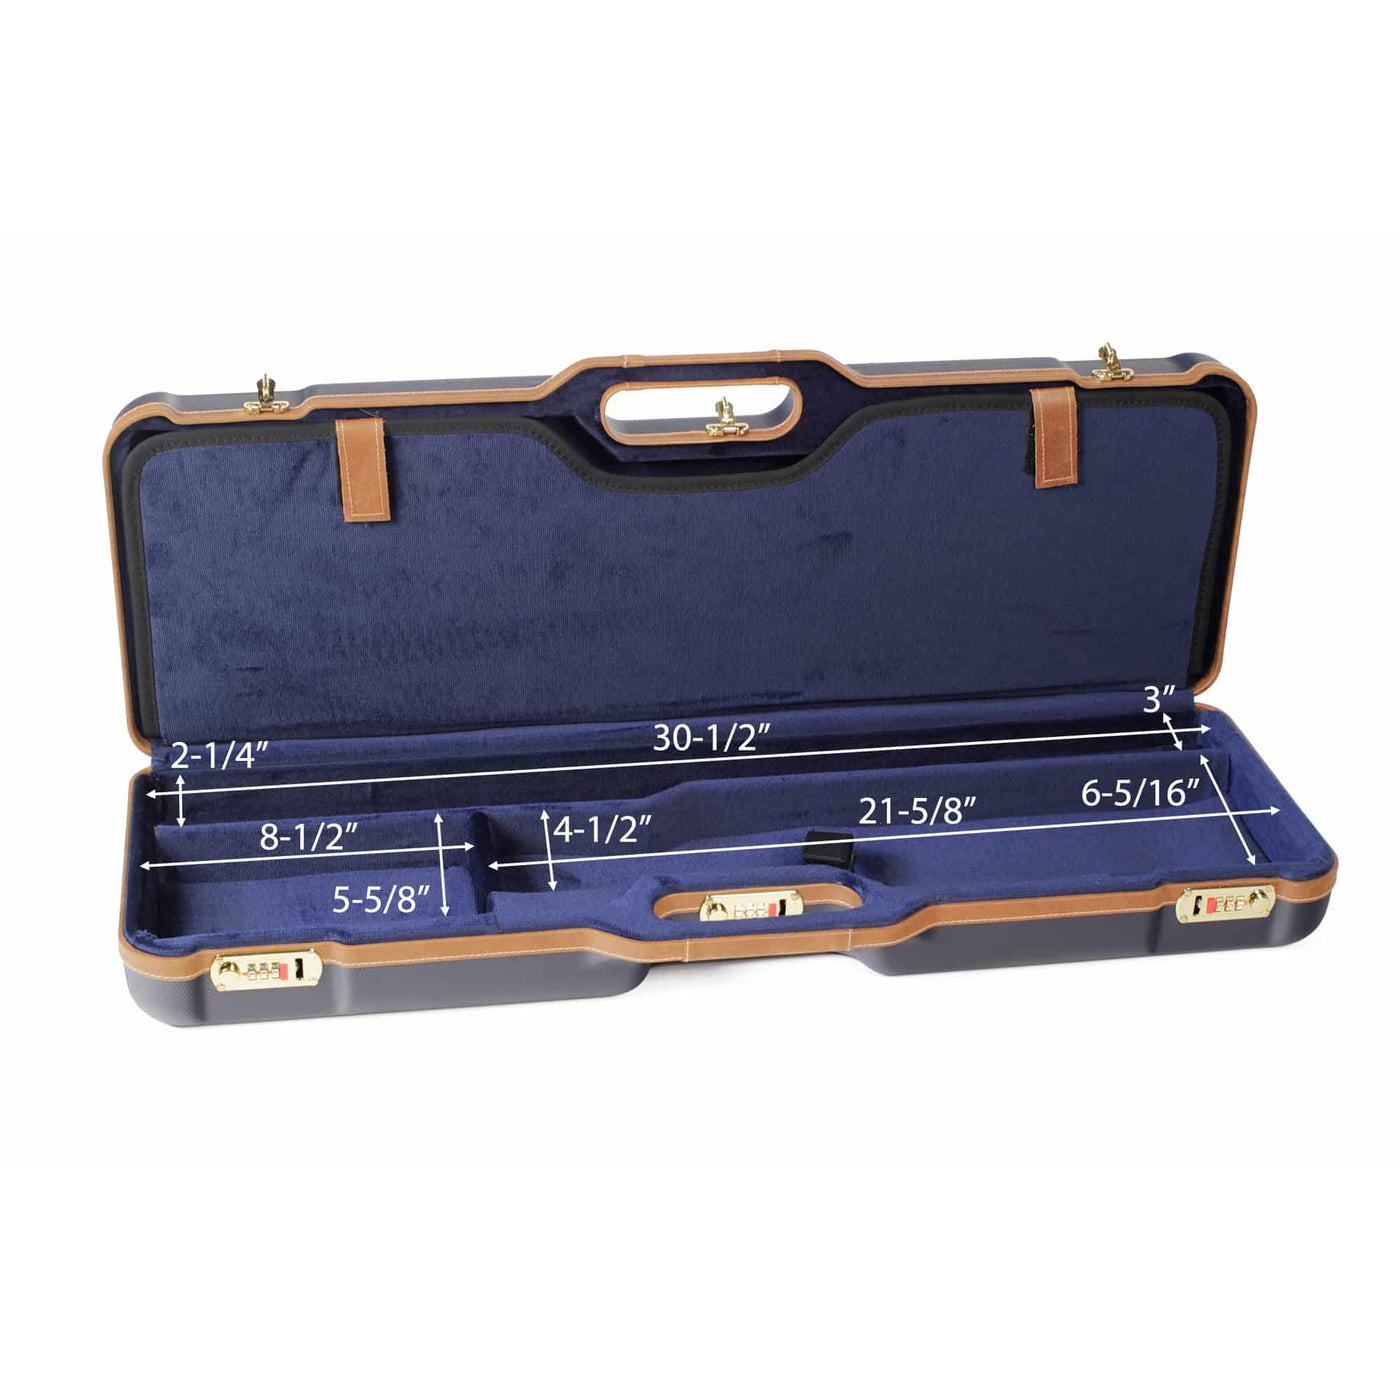 Negrini Two OU/SxS Deluxe Shotgun Travel Case-HUNTING/OUTDOORS-Navy/Tobacco-Kevin's Fine Outdoor Gear & Apparel